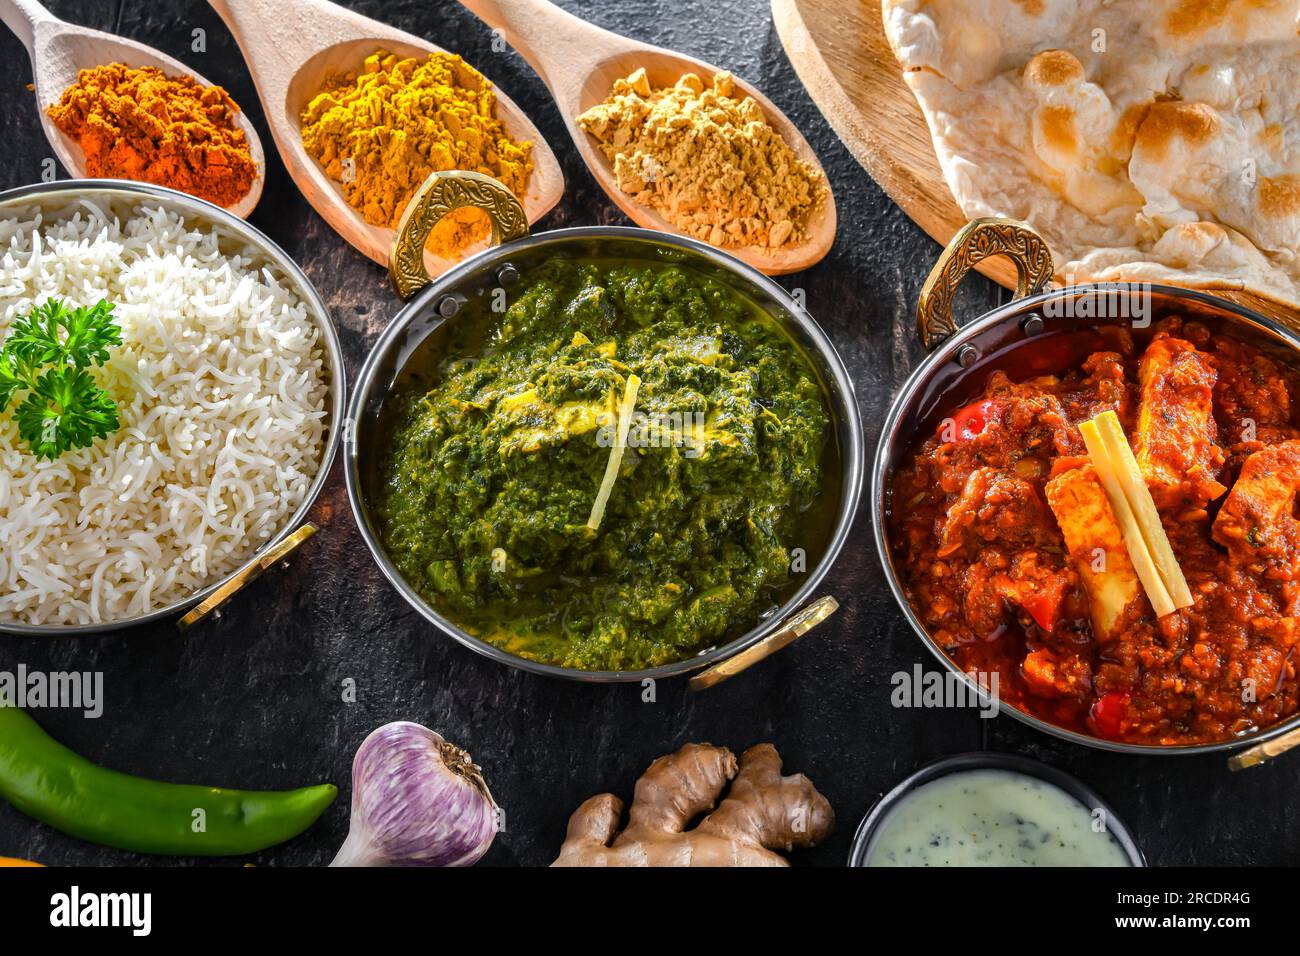 https://c8.alamy.com/comp/2RCDR4G/composition-with-indian-dishes-madras-paneer-palak-paneer-and-shahi-paneer-with-basmati-rice-served-in-original-indian-karahi-pots-2RCDR4G.jpg